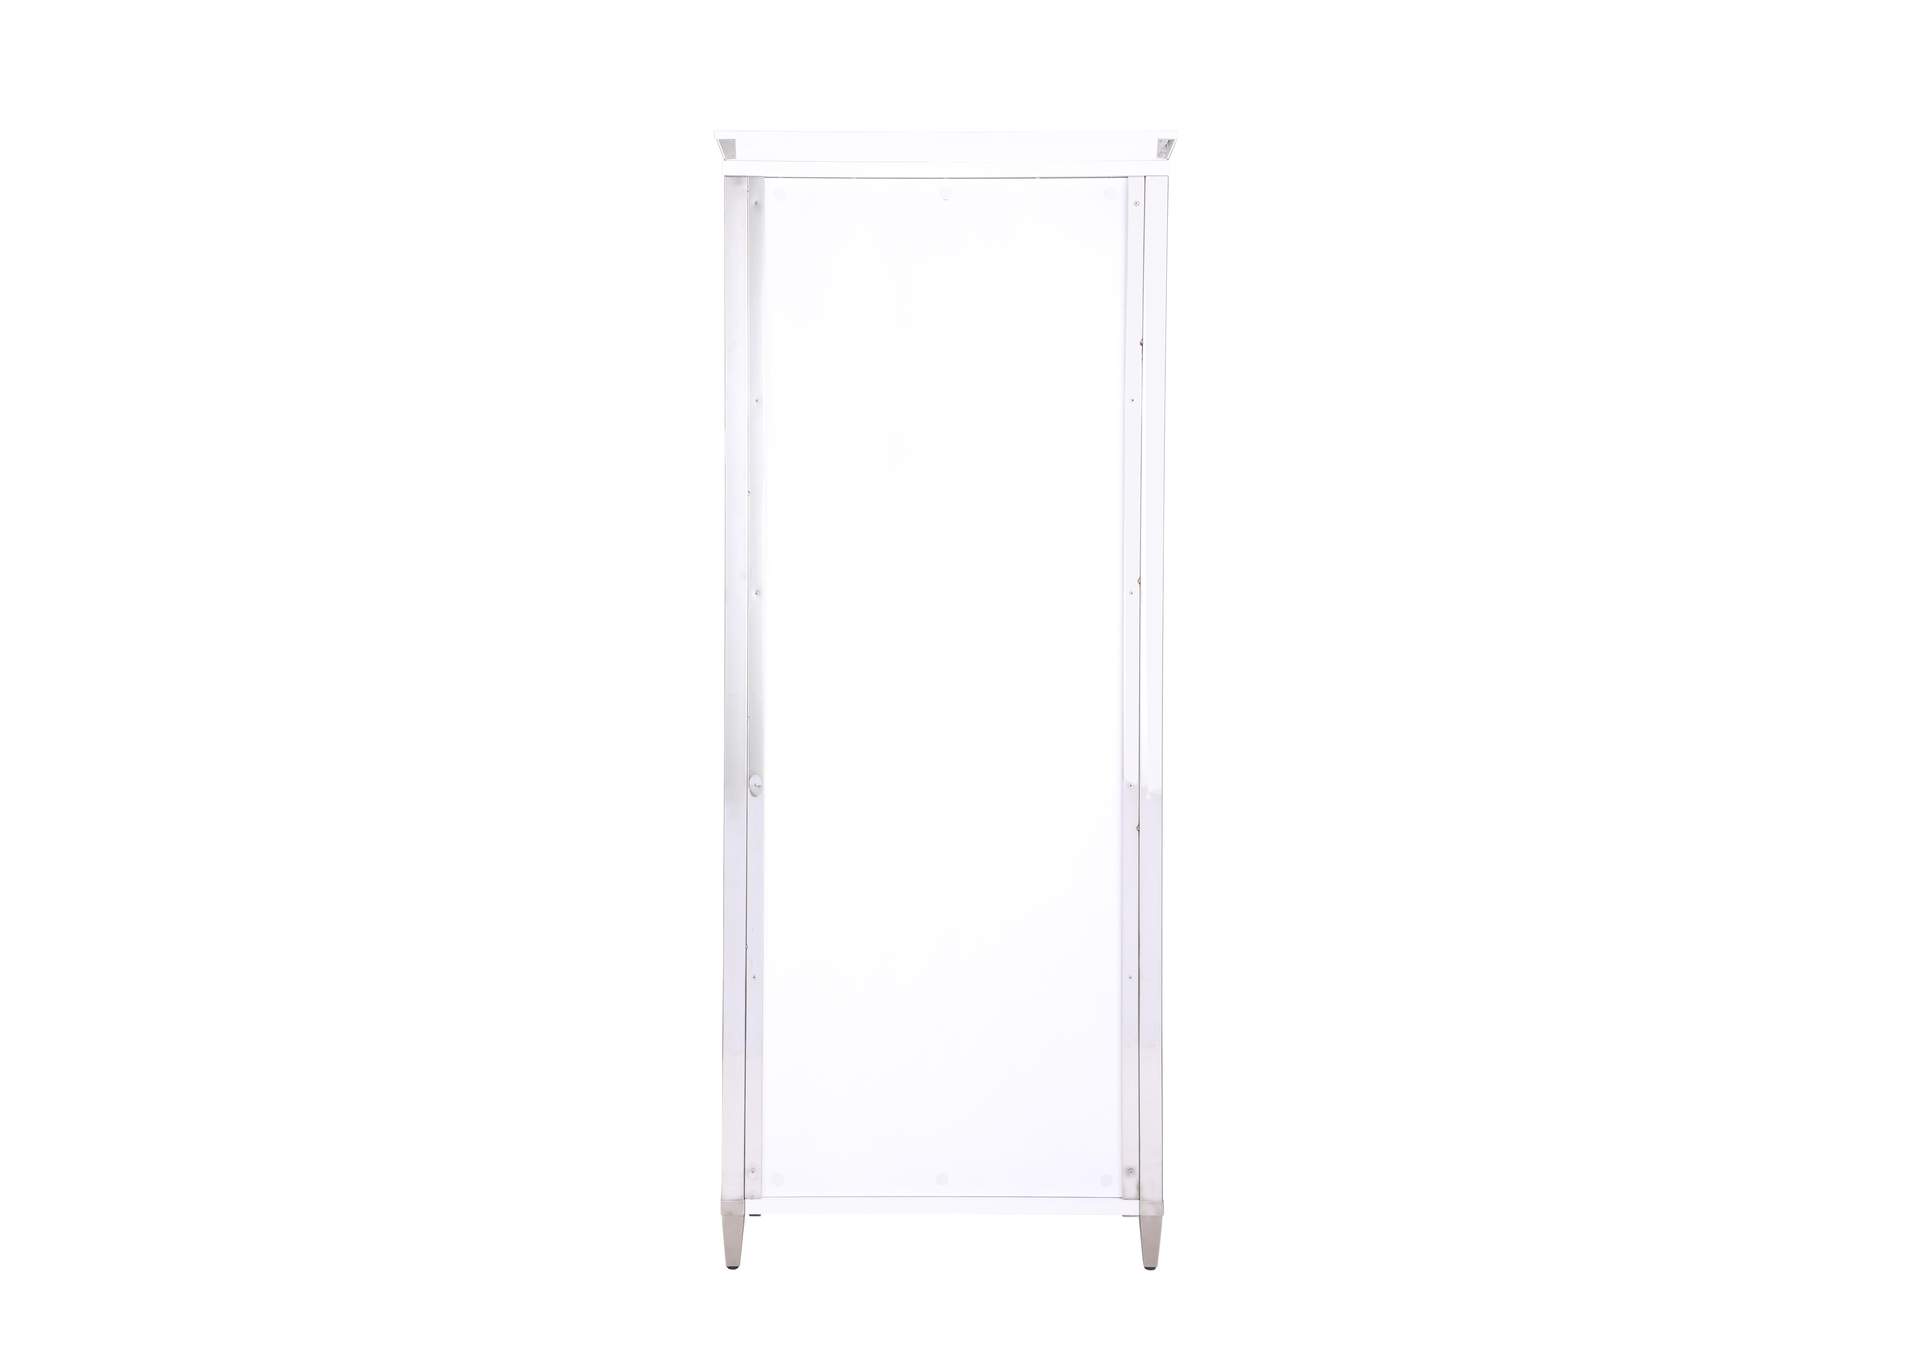 Contemporary Tempered Glass Curio With Shelves , Lighting & Locking Doors,Chintaly Imports